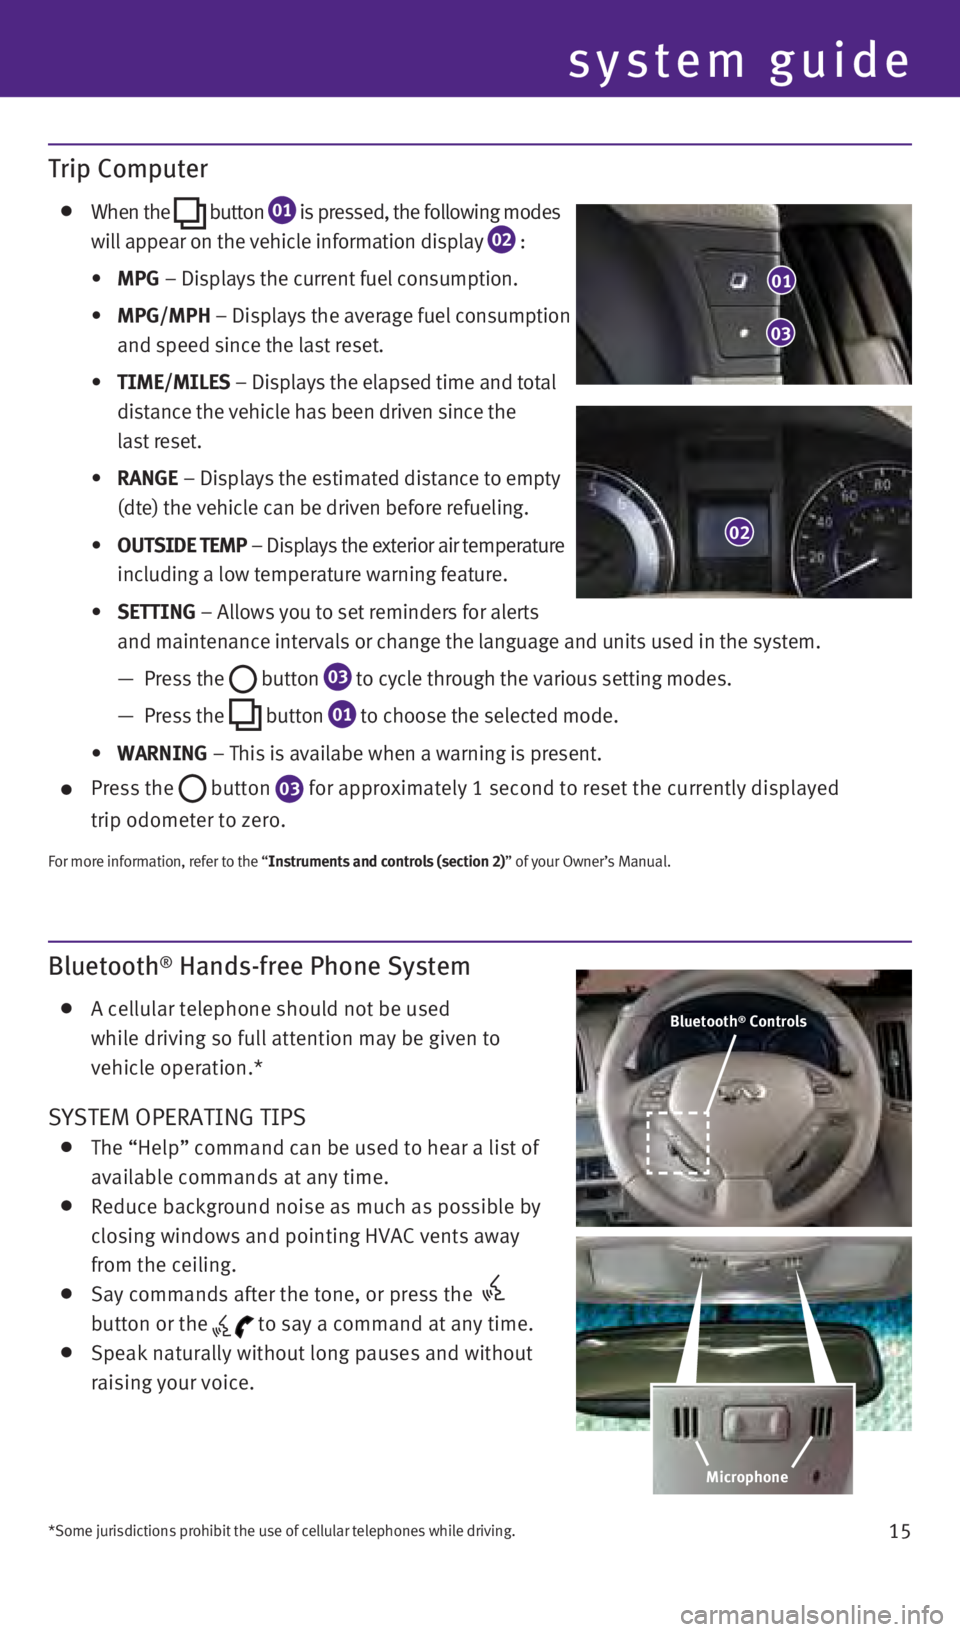 INFINITI Q60 COUPE 2014  Quick Reference Guide 15
Bluetooth® Hands-free Phone System
   A cellular telephone should not be used   
while driving so full attention may be given to 
vehicle operation.*
SySTEM OPERATING TIPS    The “Help” comman